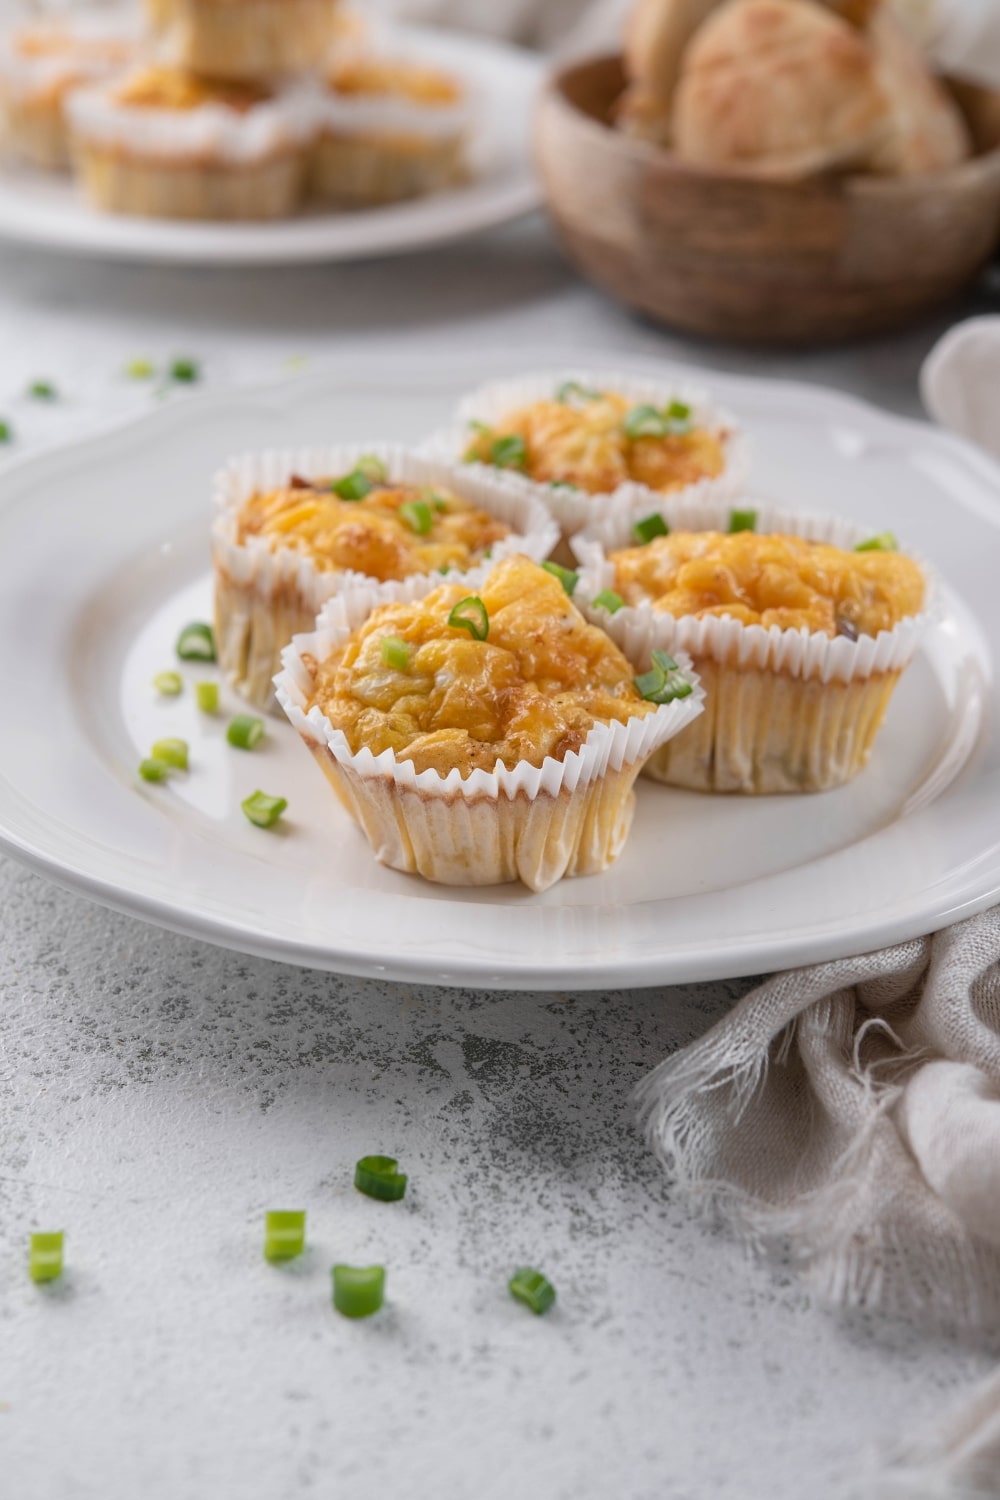 Four sausage egg muffin cups garnished with green onion on a plate. Behind is another plate of stacked sausage egg muffins.